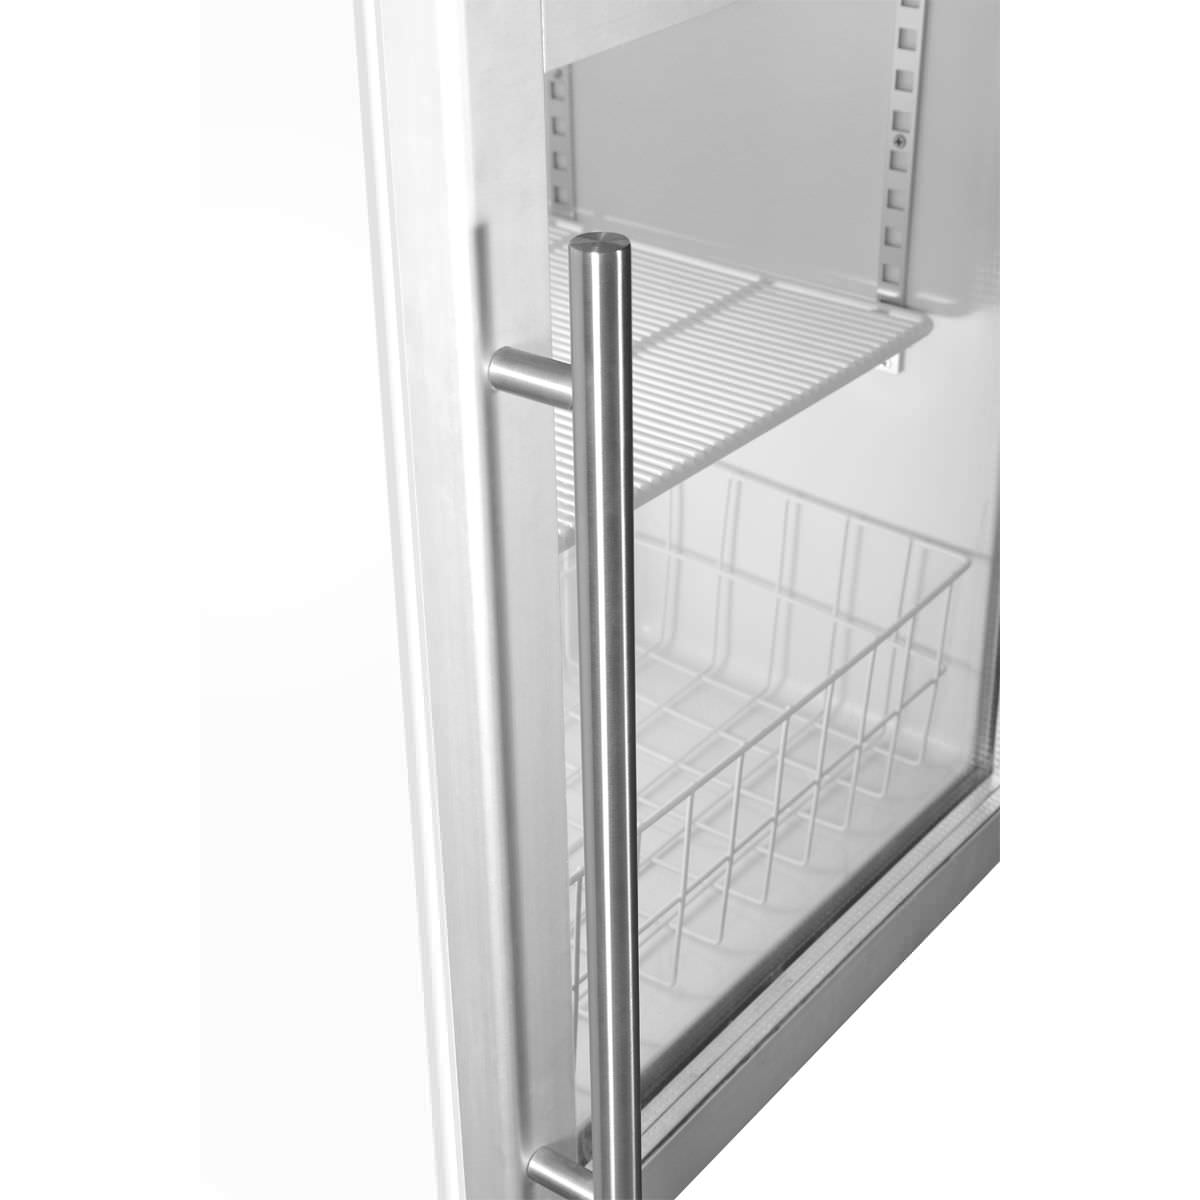 Pharmacy refrigerator / built-in / 1-door 2 °C ... 8 °C, 68 L | HYC-68A Haier Medical and Laboratory Products